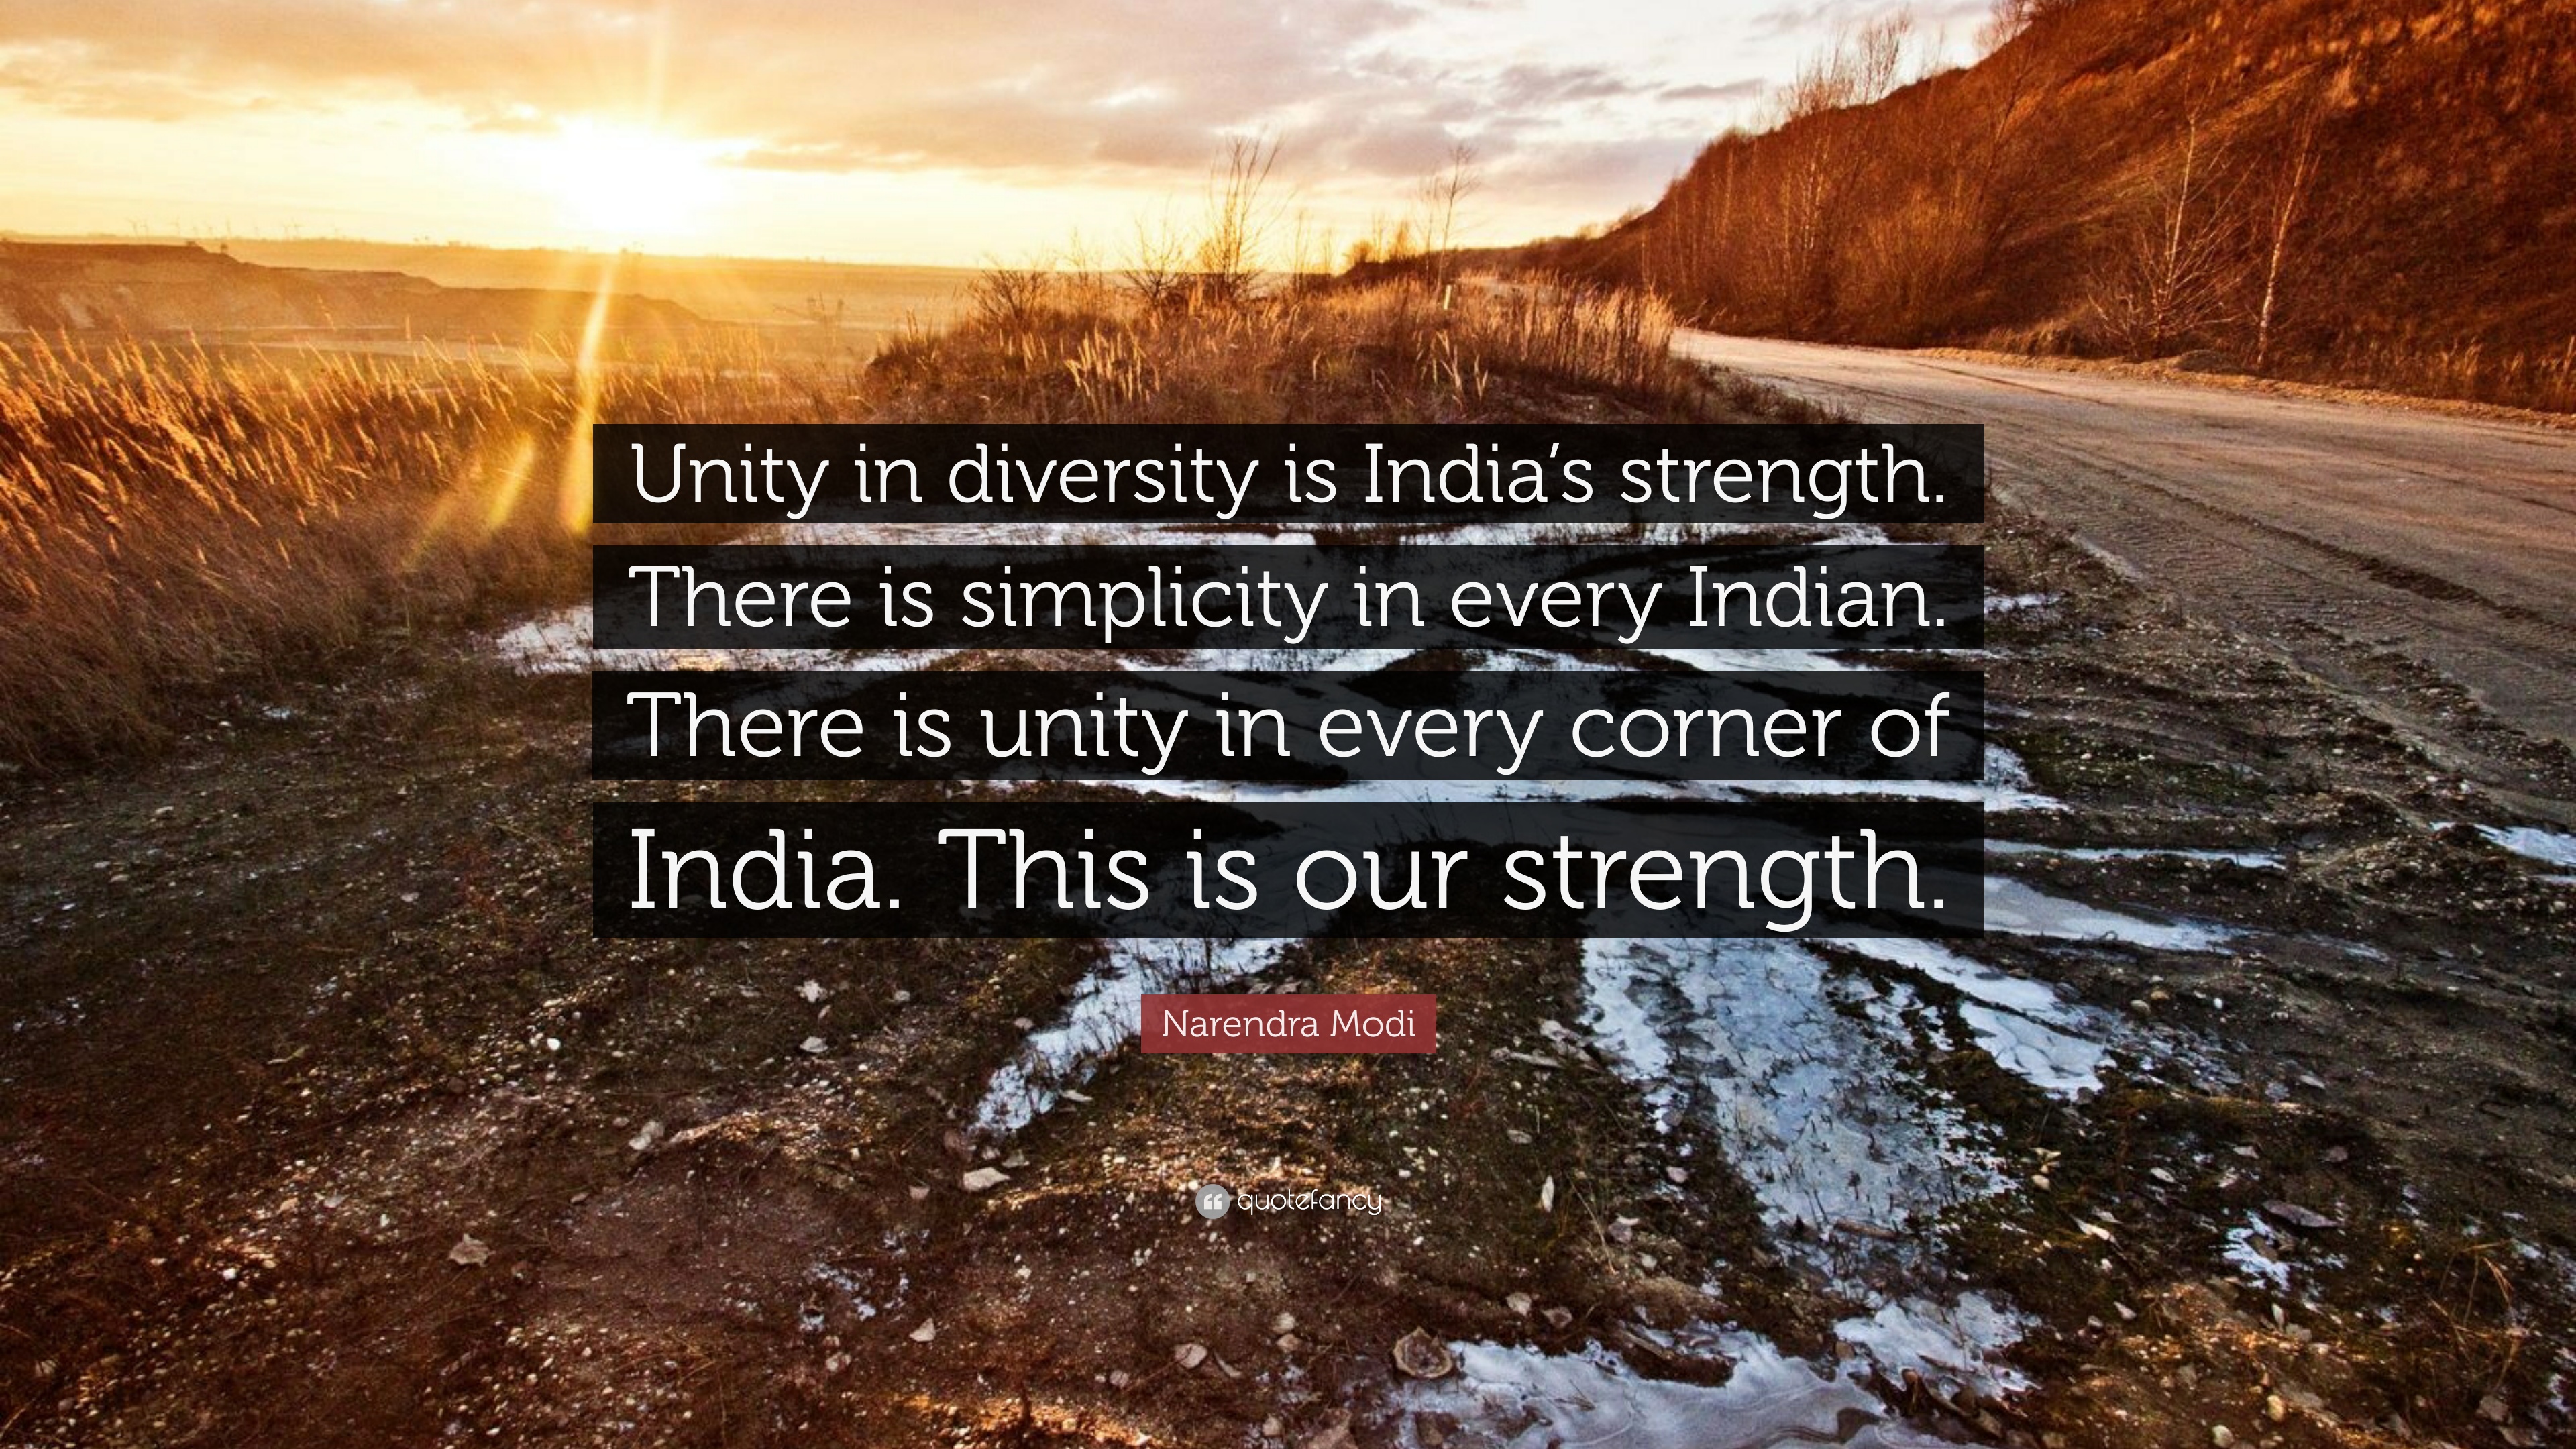 unity in diversity is india’s strength. there is simplicity in every indian. there is unity in every cornver of indian. this is our strength. narendra modi